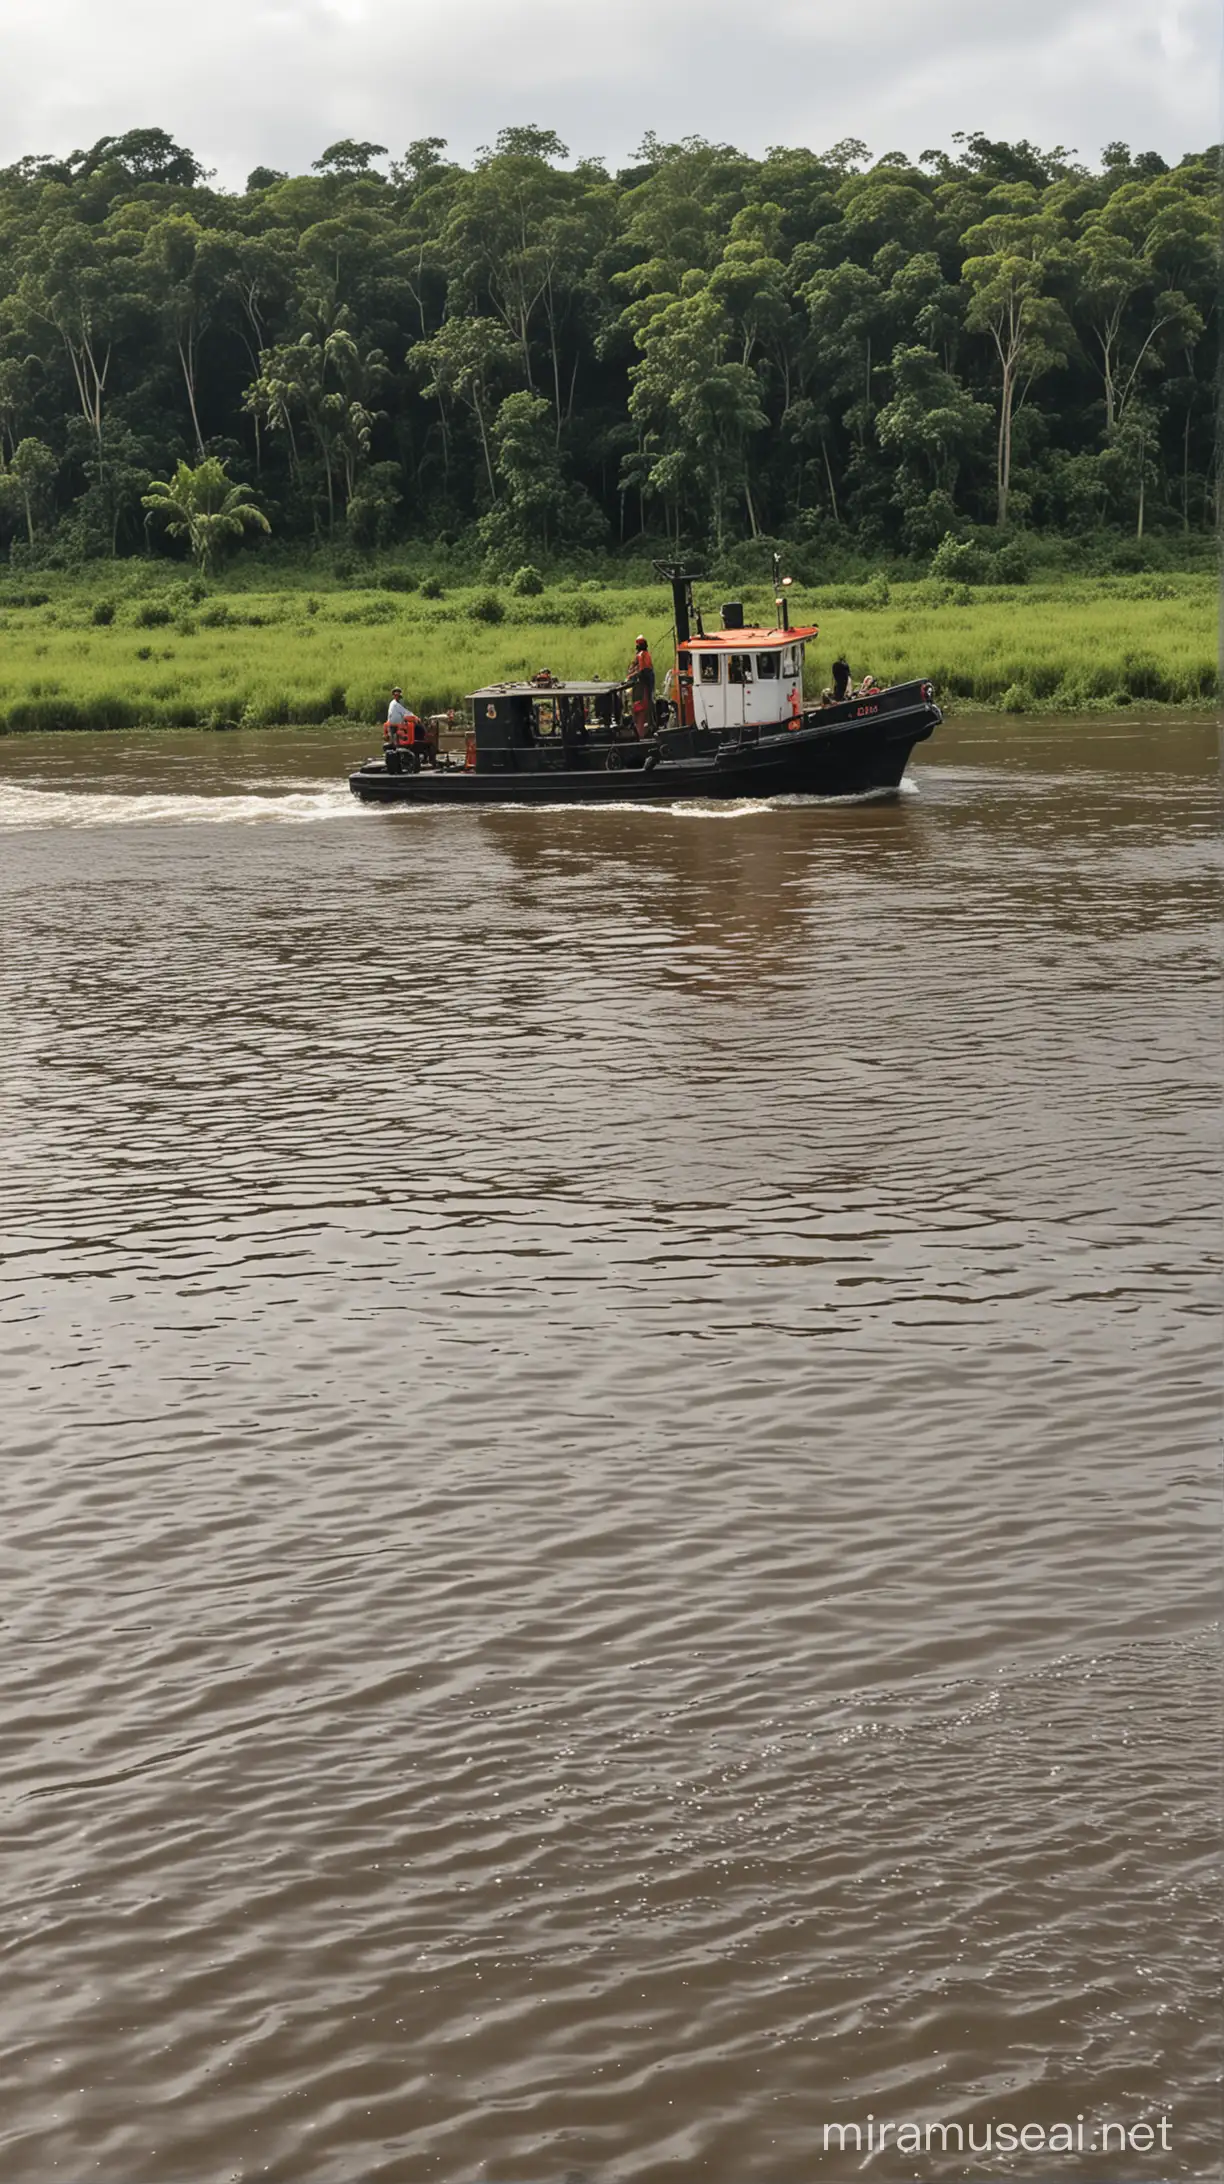 Tugboat in the river Amazon,elephant drink